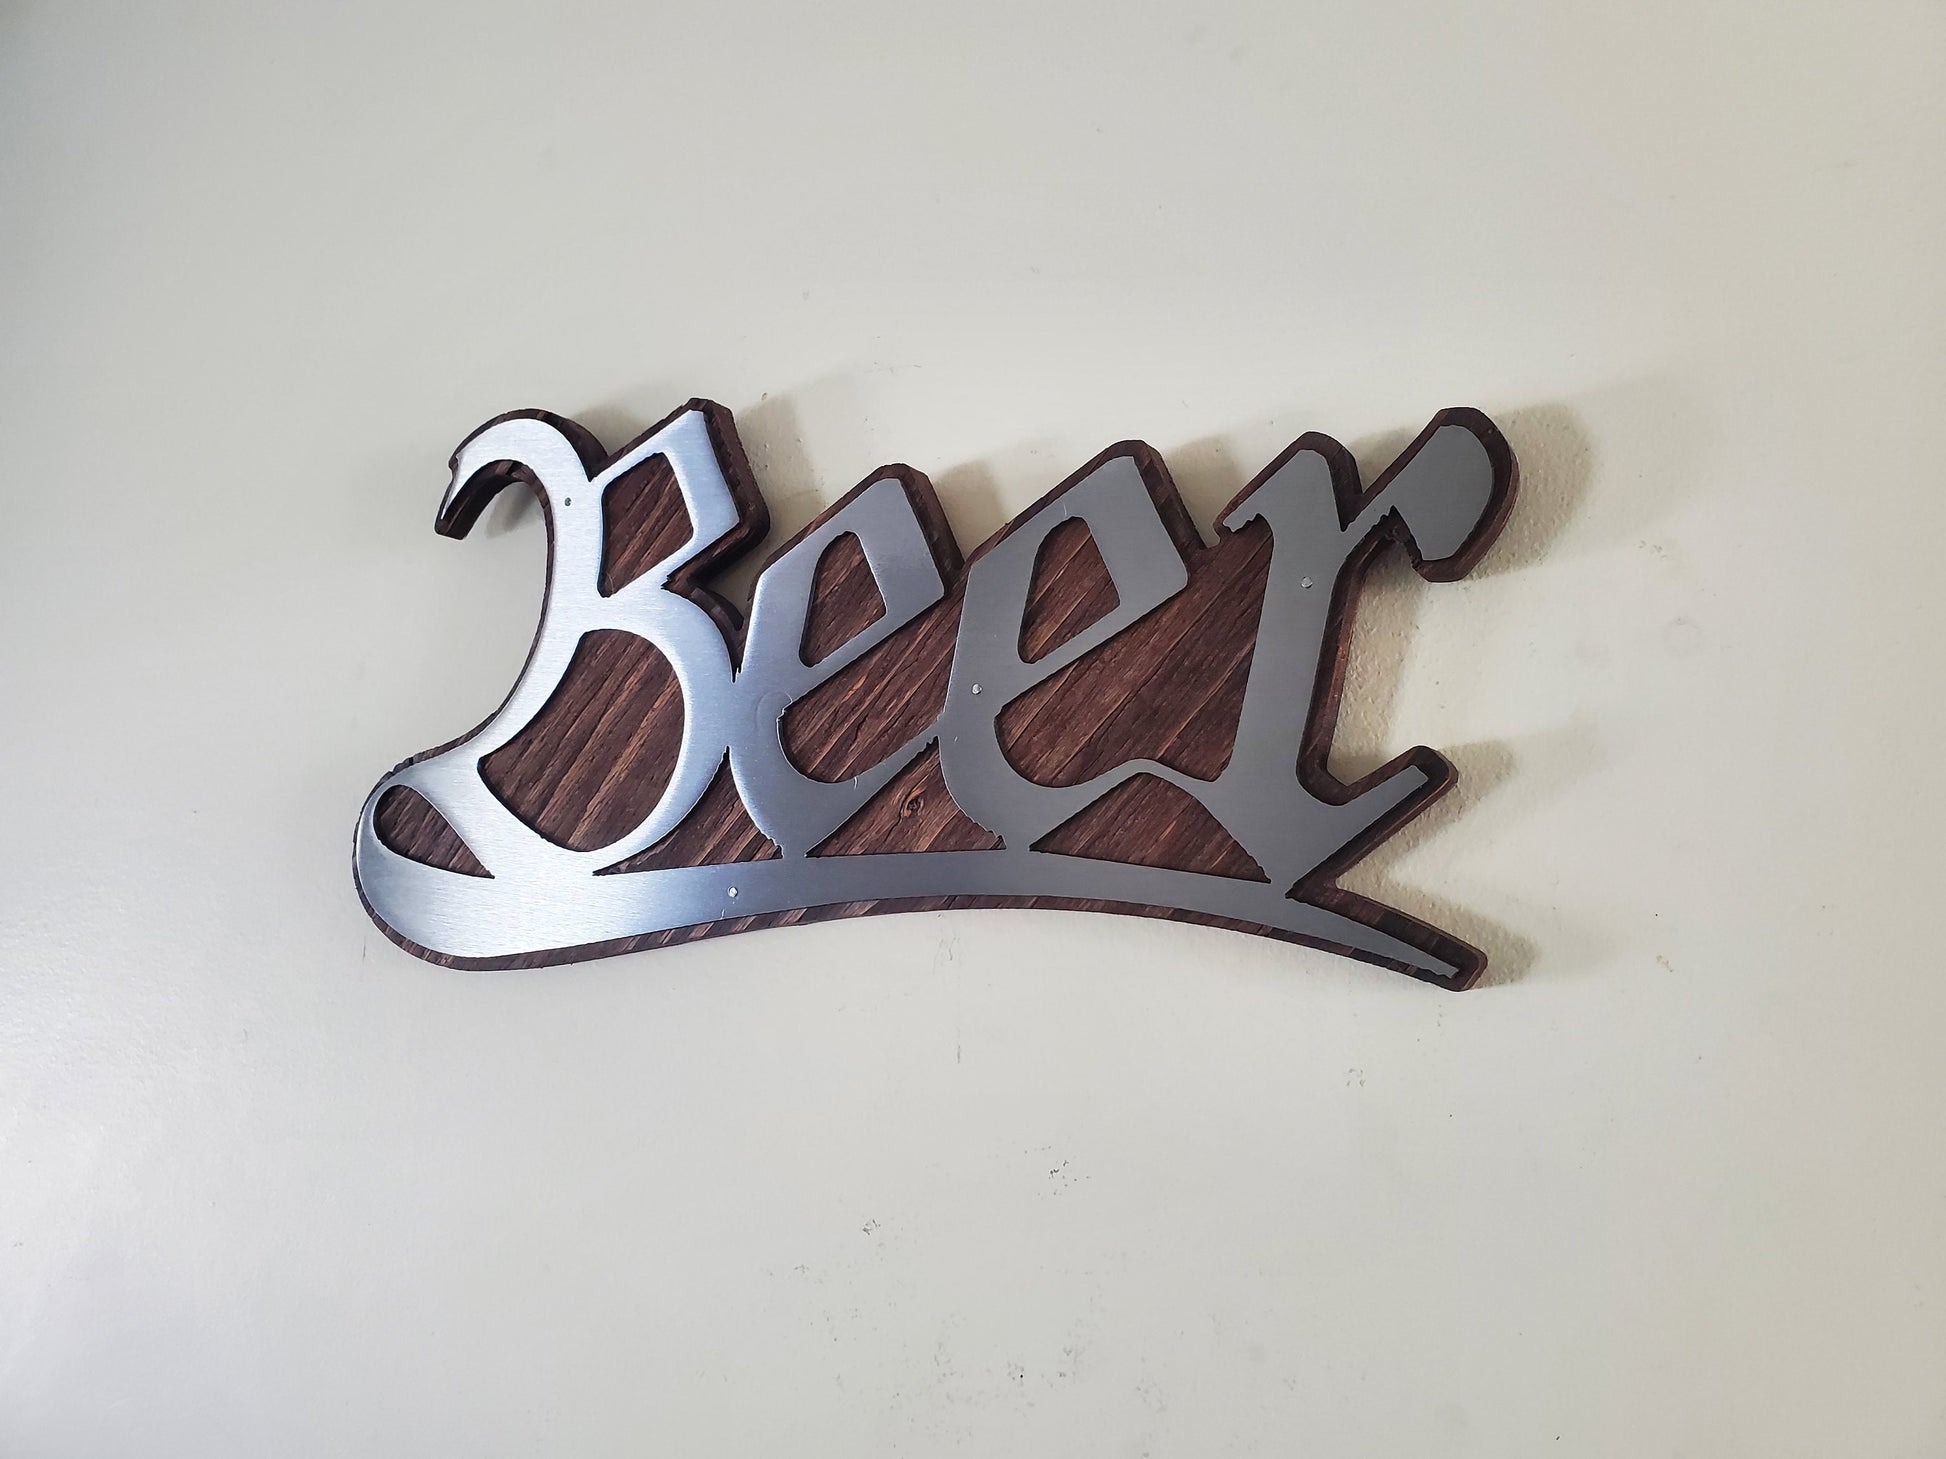 Beer stylized word metal art on stained wood decor